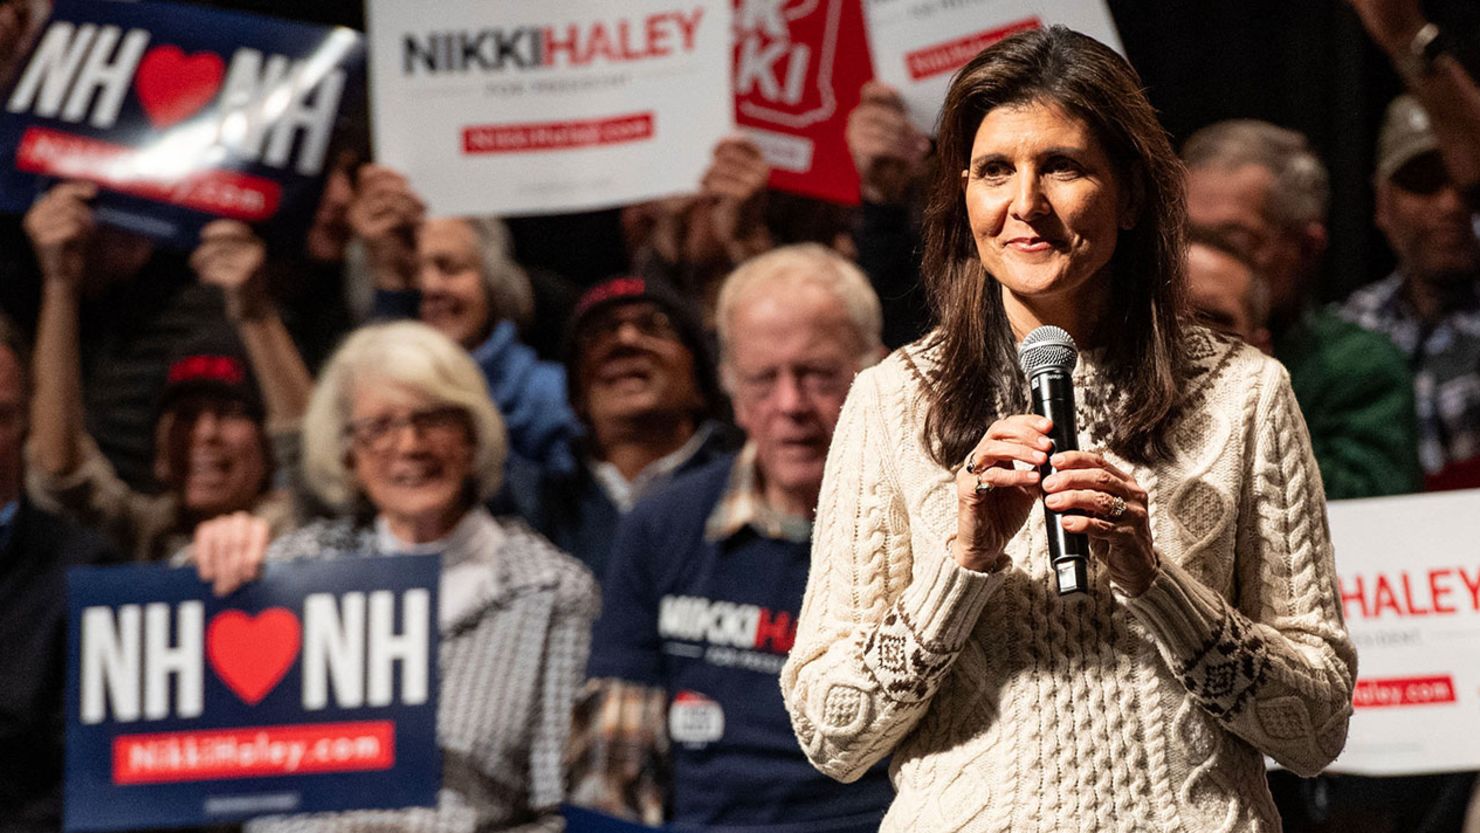 Nikki Haley speaks at a campaign event in Exeter, New Hampshire, on January 21.